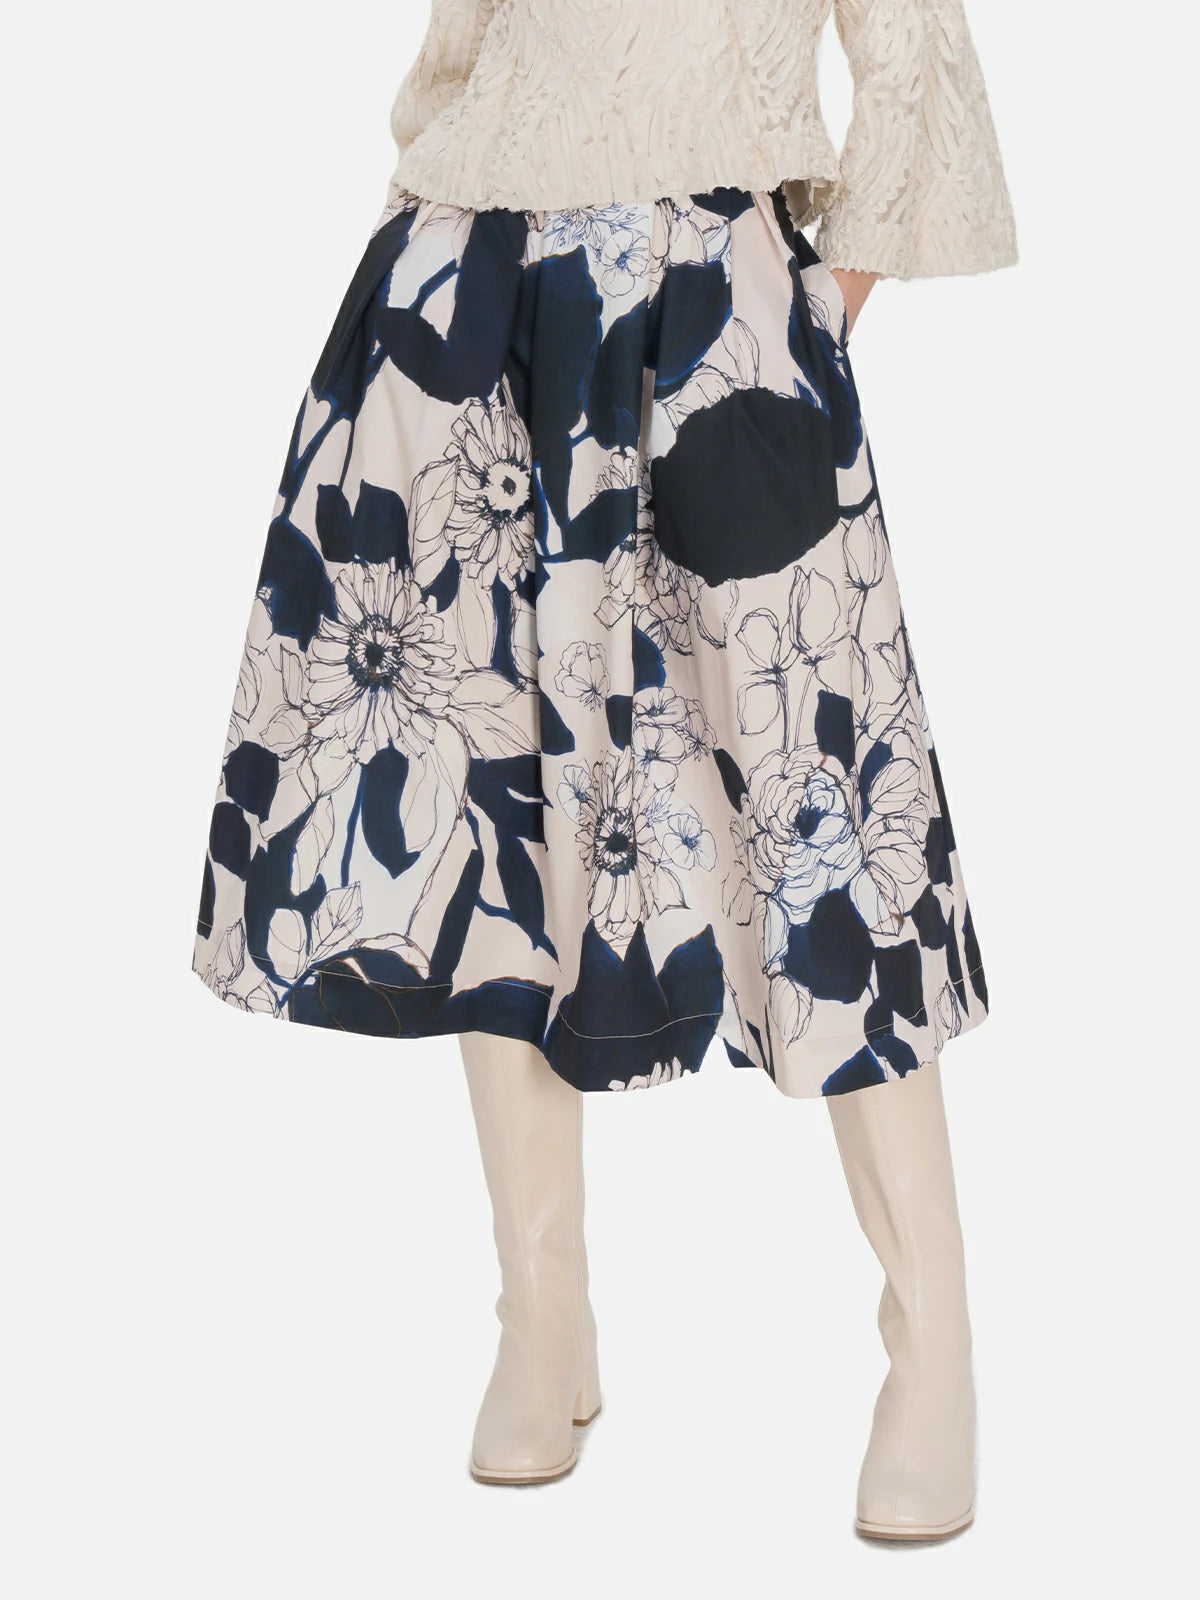 Enchanting high-waisted floral print midi skirt with a pleated A-line silhouette for a graceful look